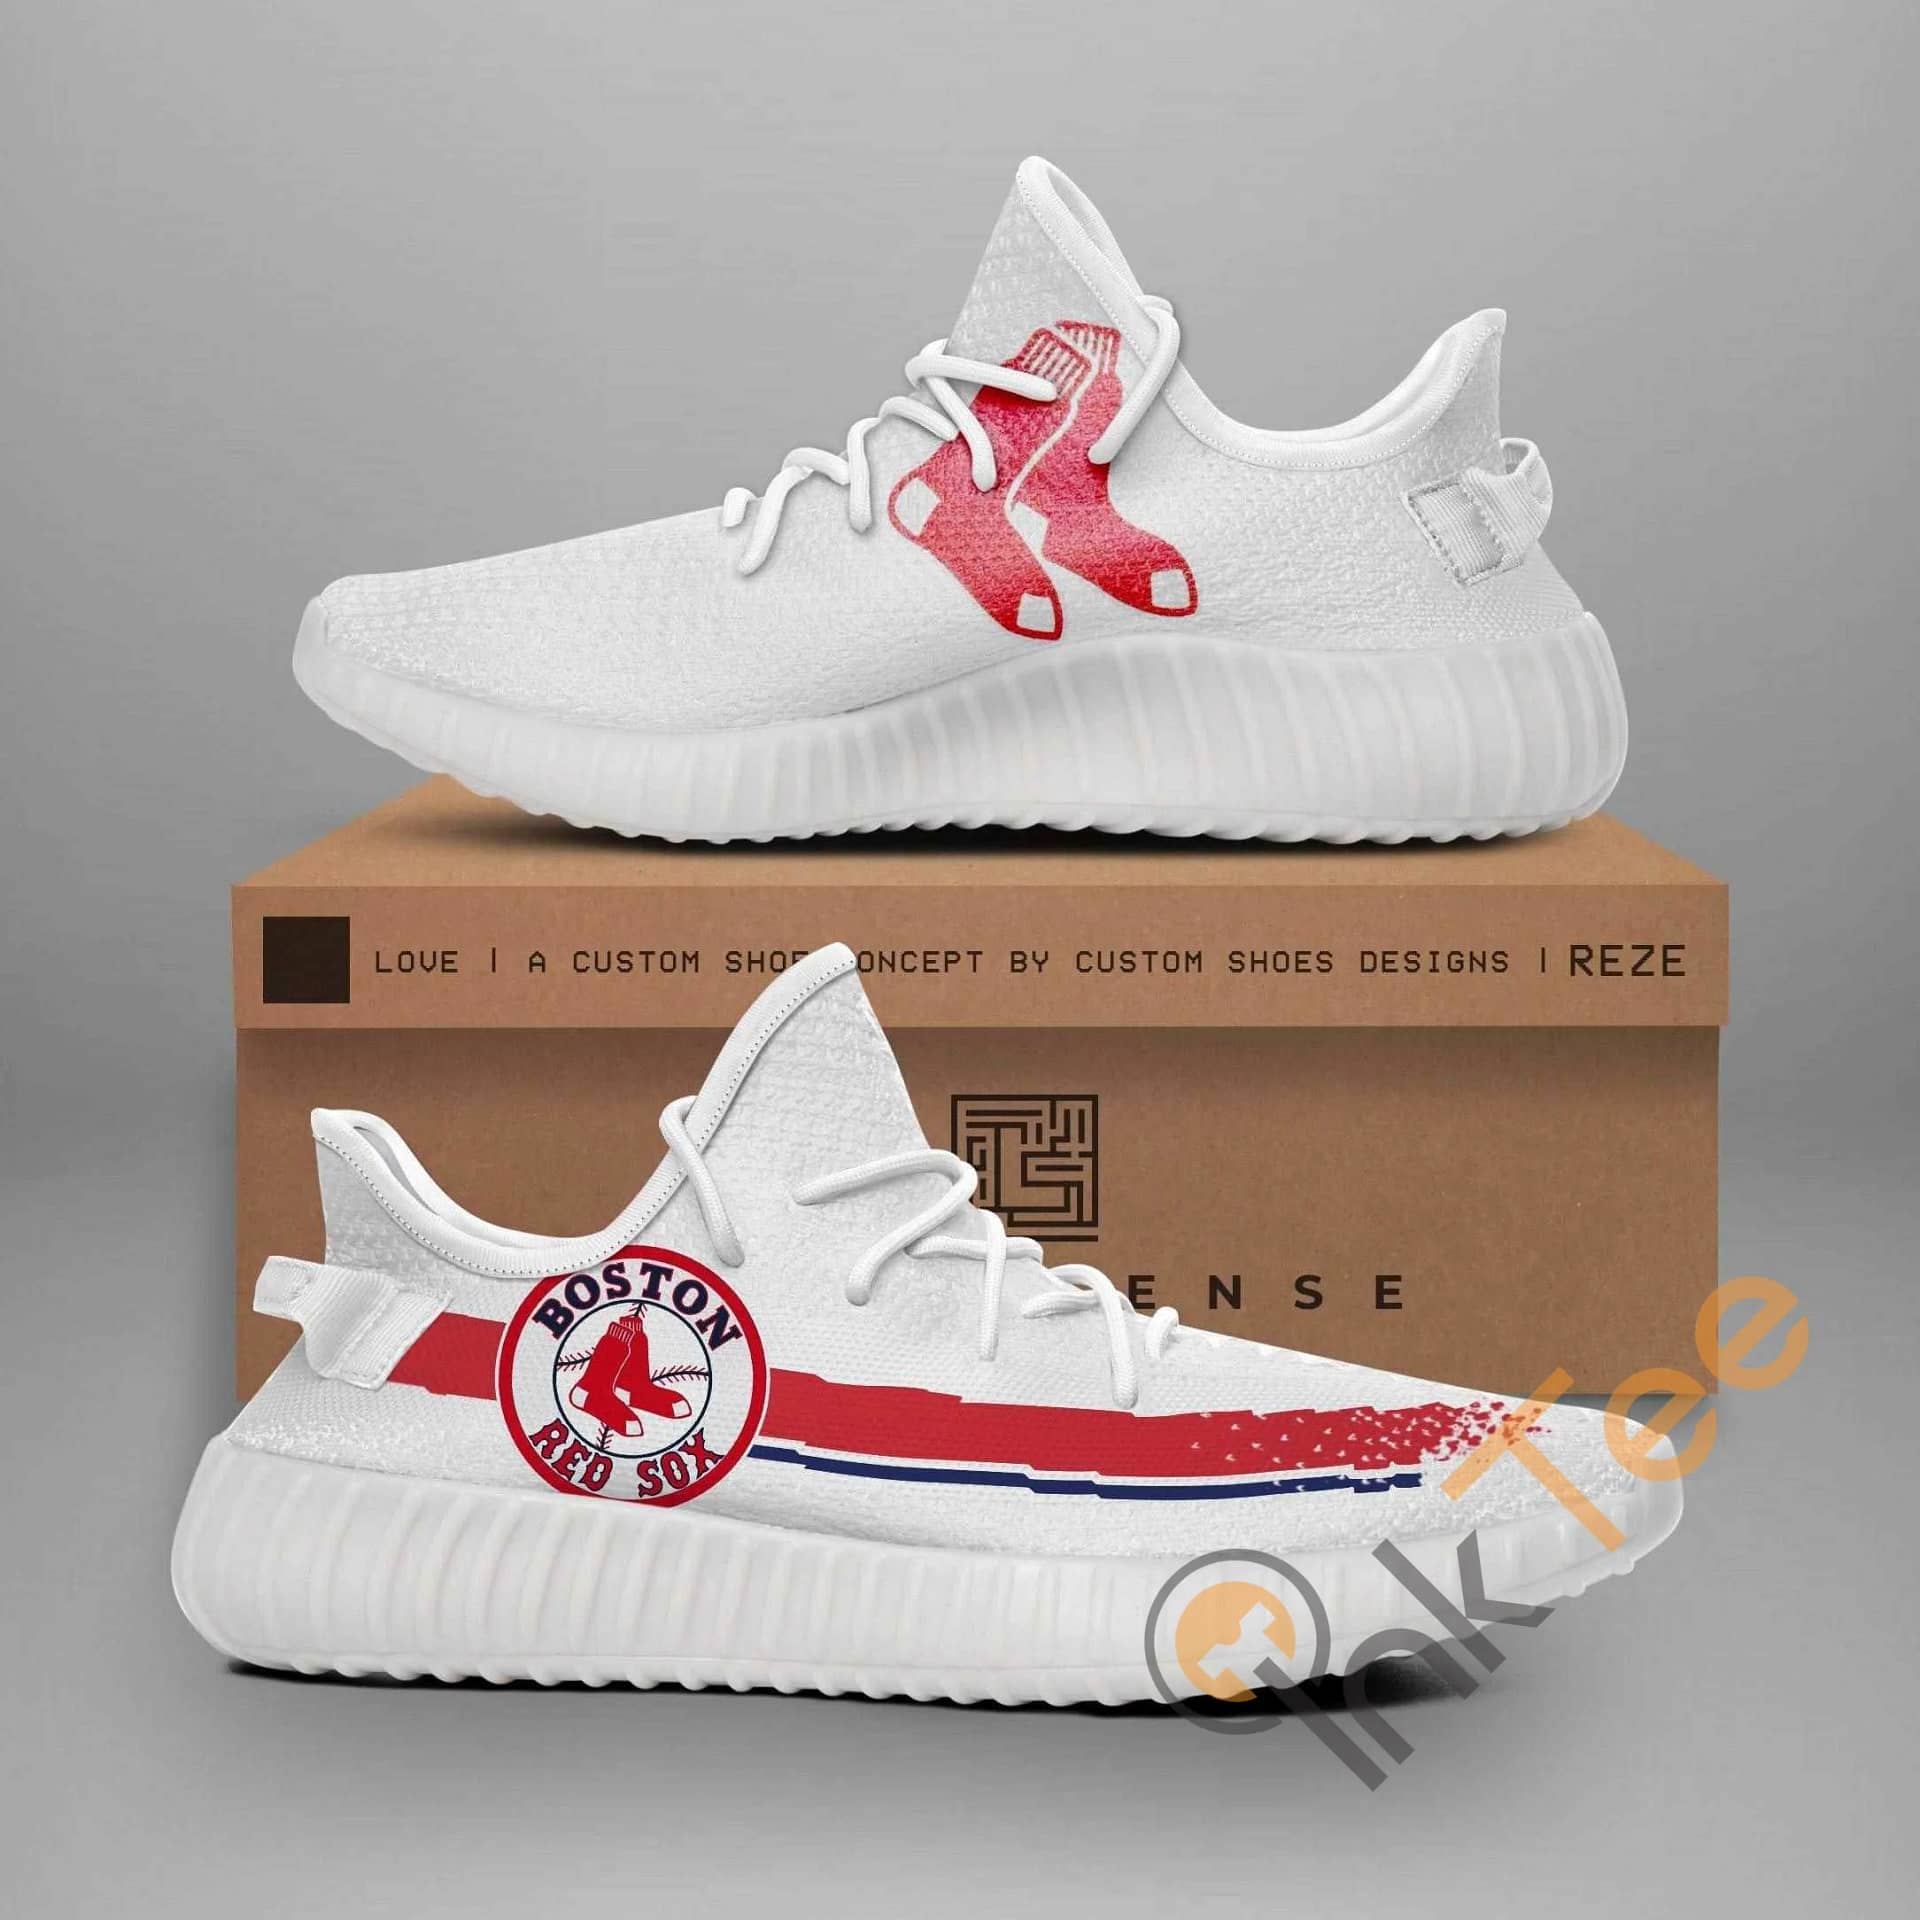 Red Sox Mlb Teams Amazon Best Selling Yeezy Boost